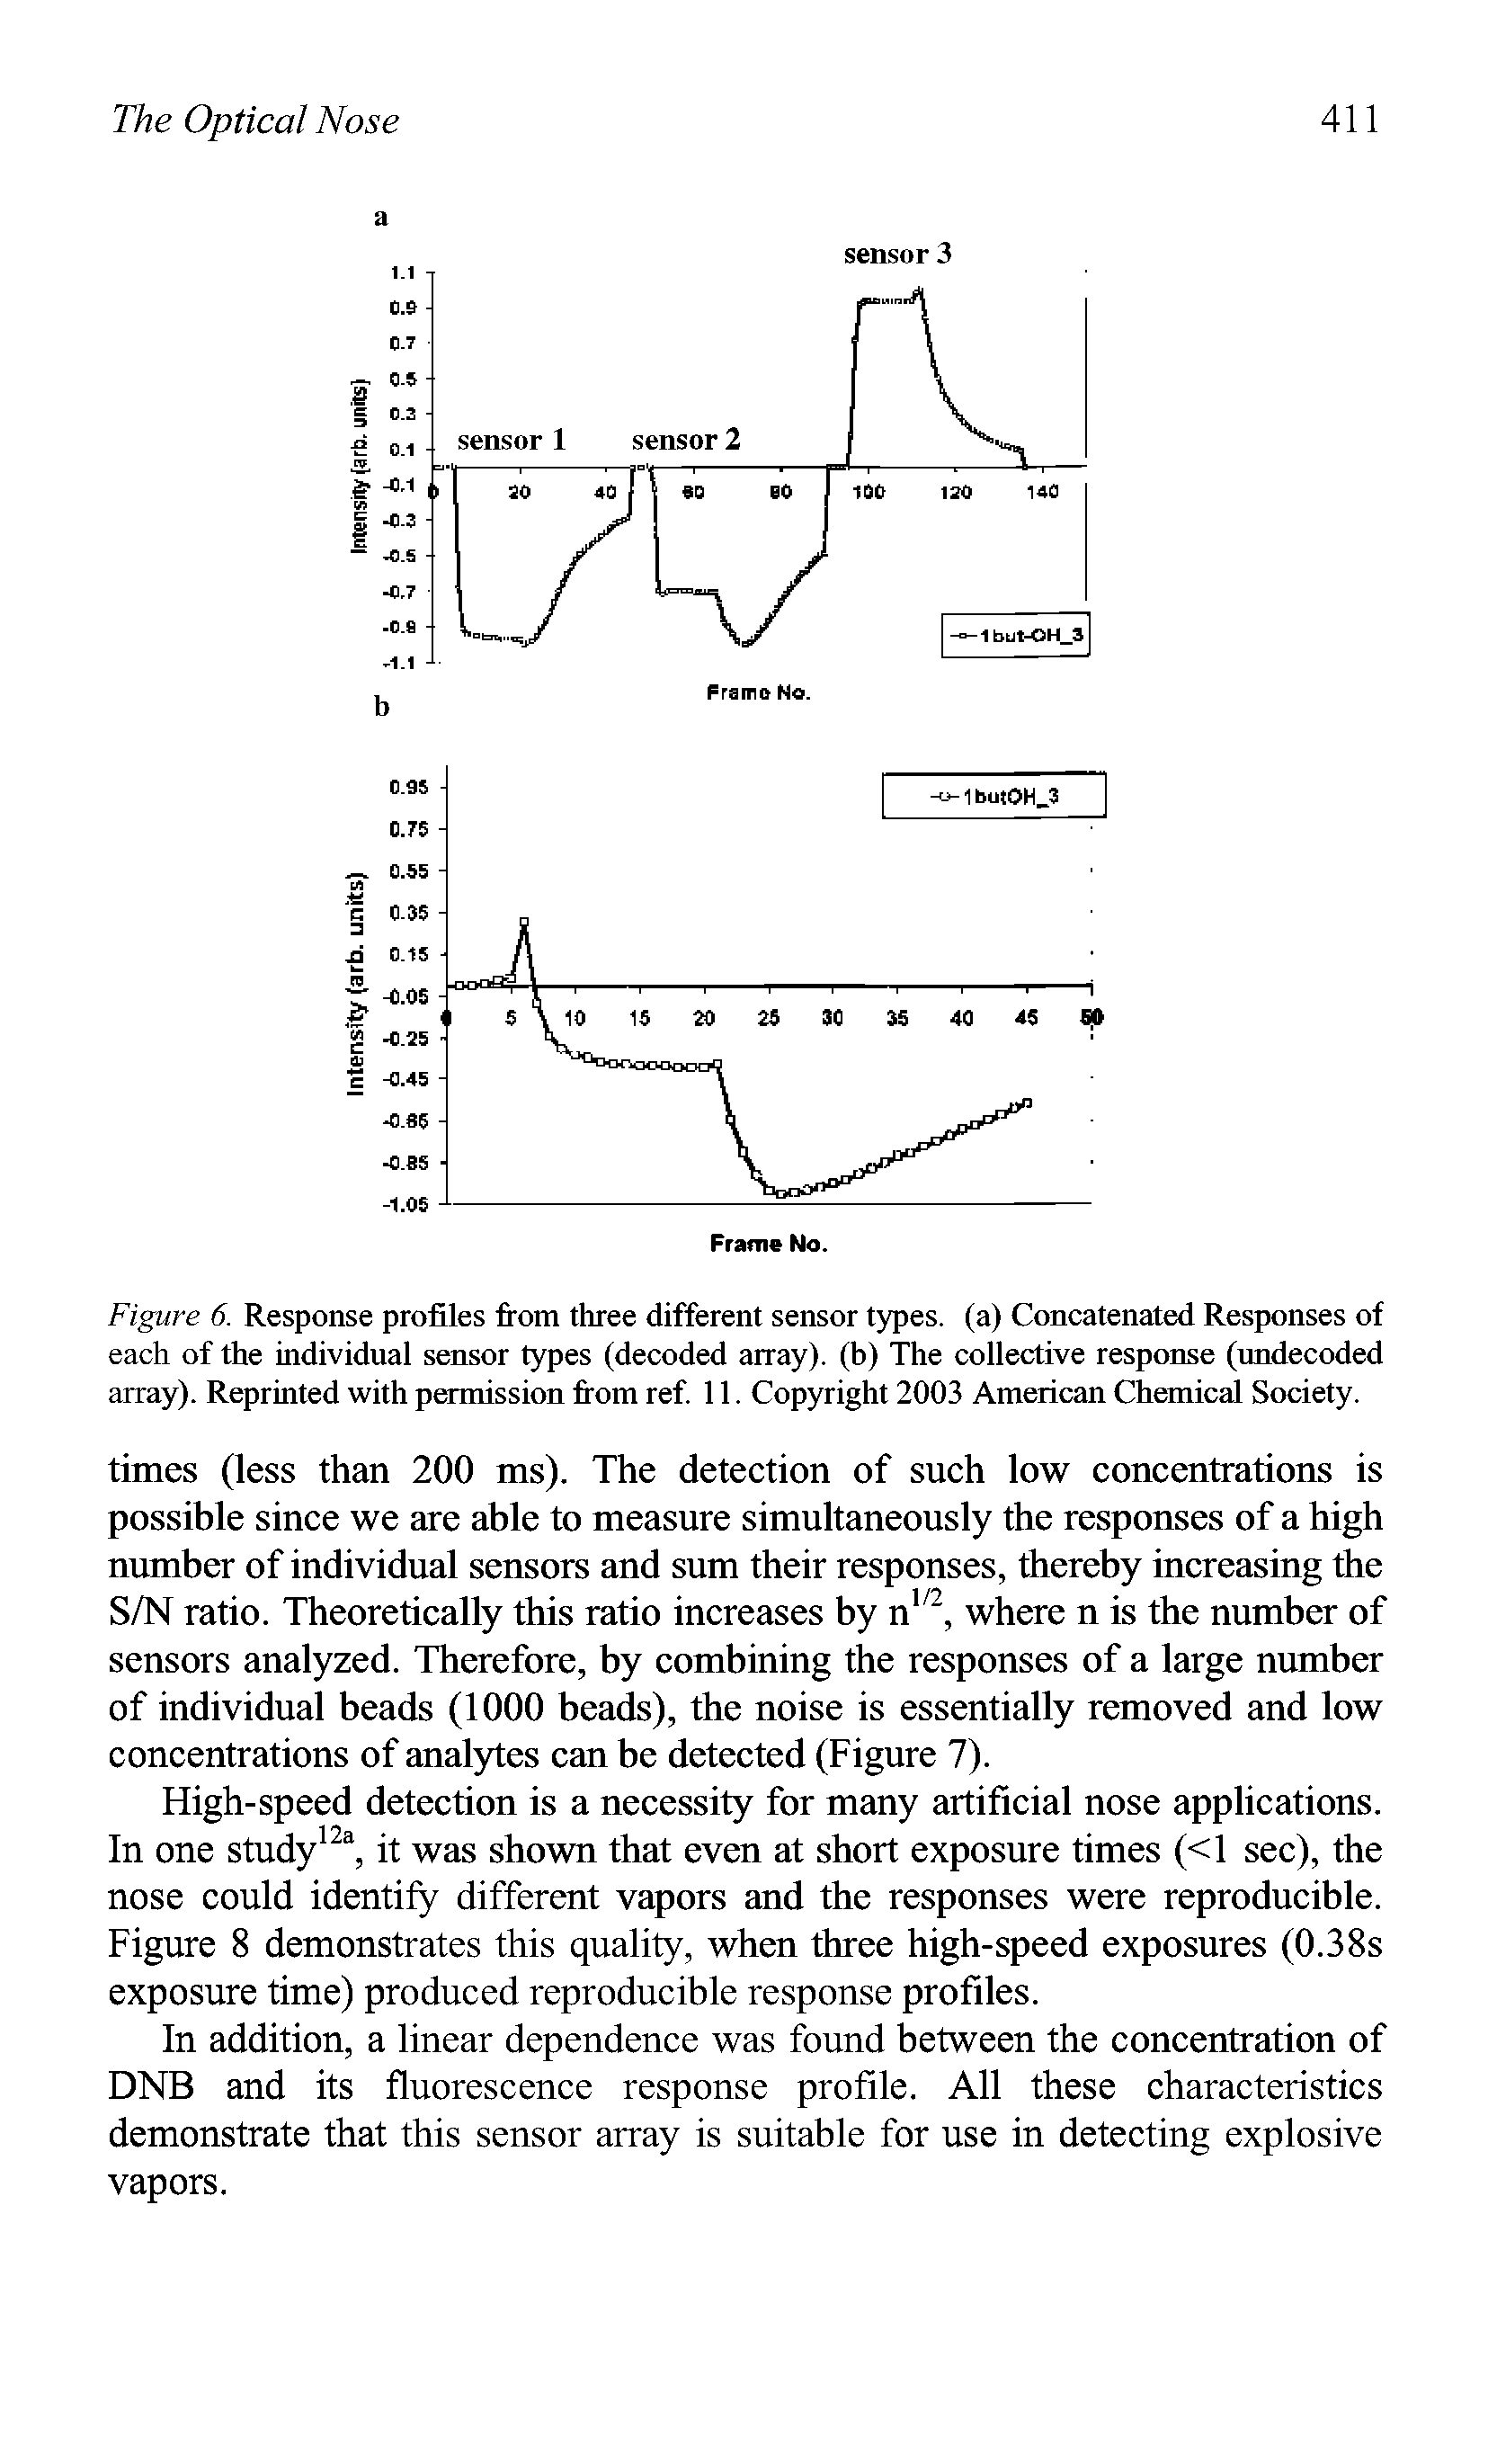 Figure 6. Response profiles from three different sensor types, (a) Concatenated Responses of each of the individual sensor types (decoded array), (b) The collective response (undecoded array). Reprinted with permission from ref. 11. Copyright 2003 American Chemical Society.